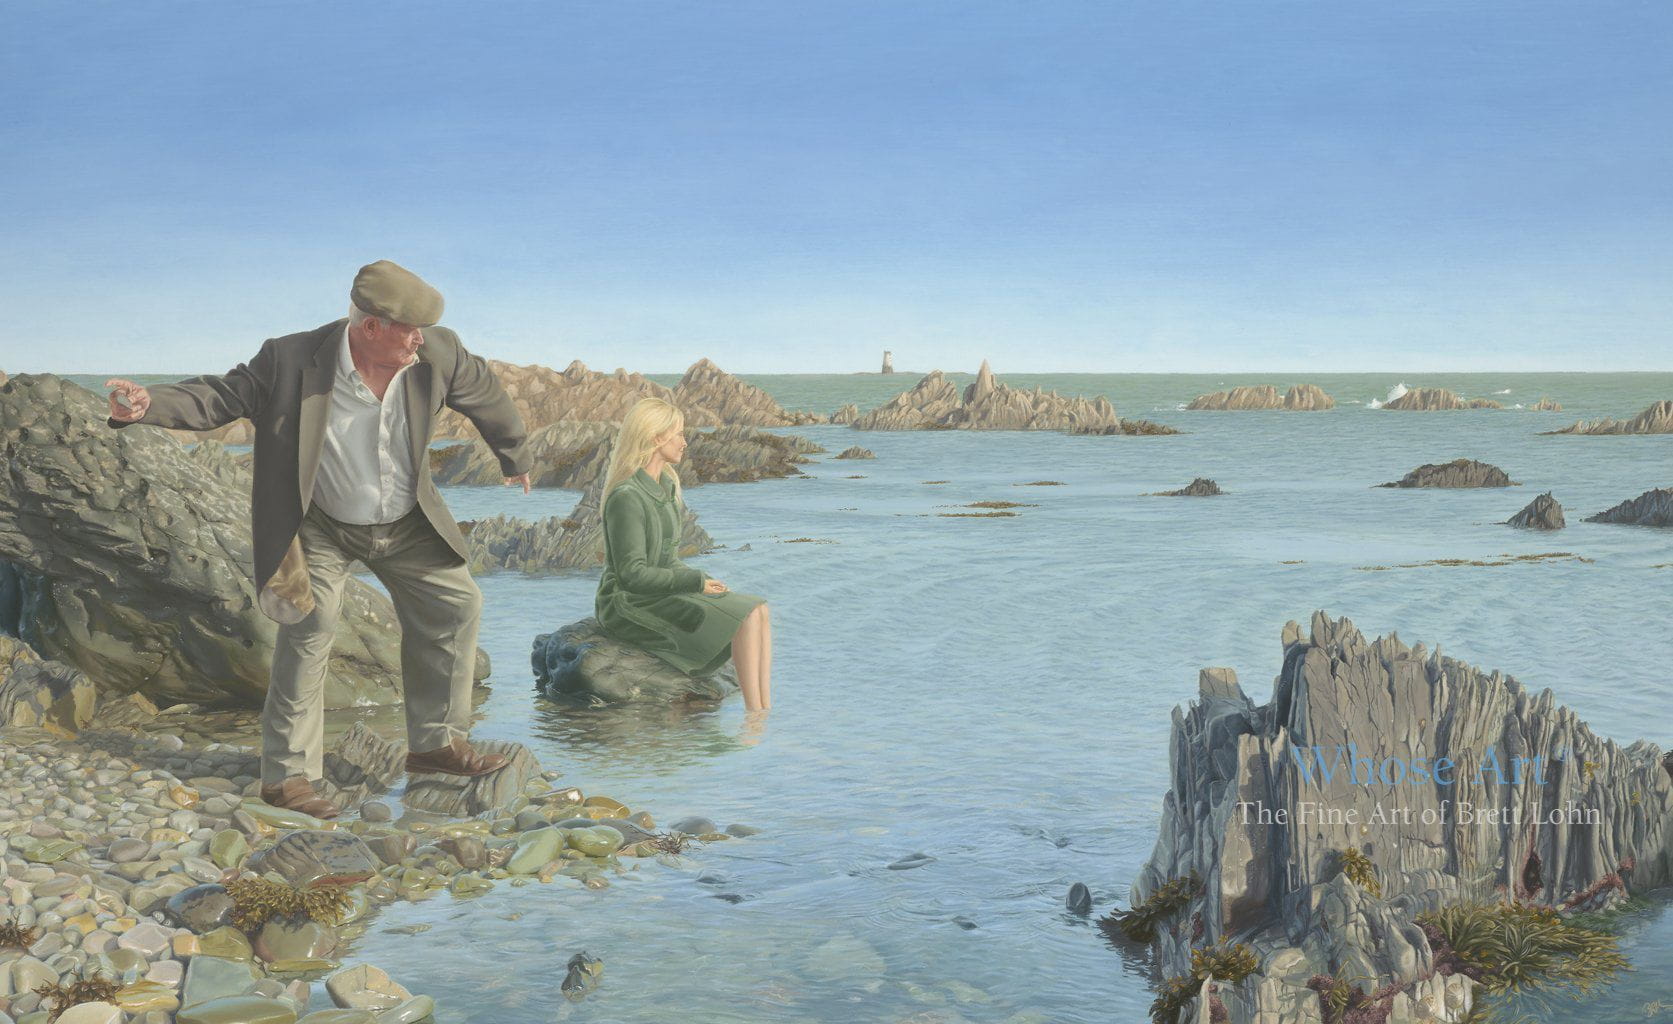 Narrative art print story of a man beneath a blue sky, standing by the sea, skimming a stone with a mysterious lady paddling